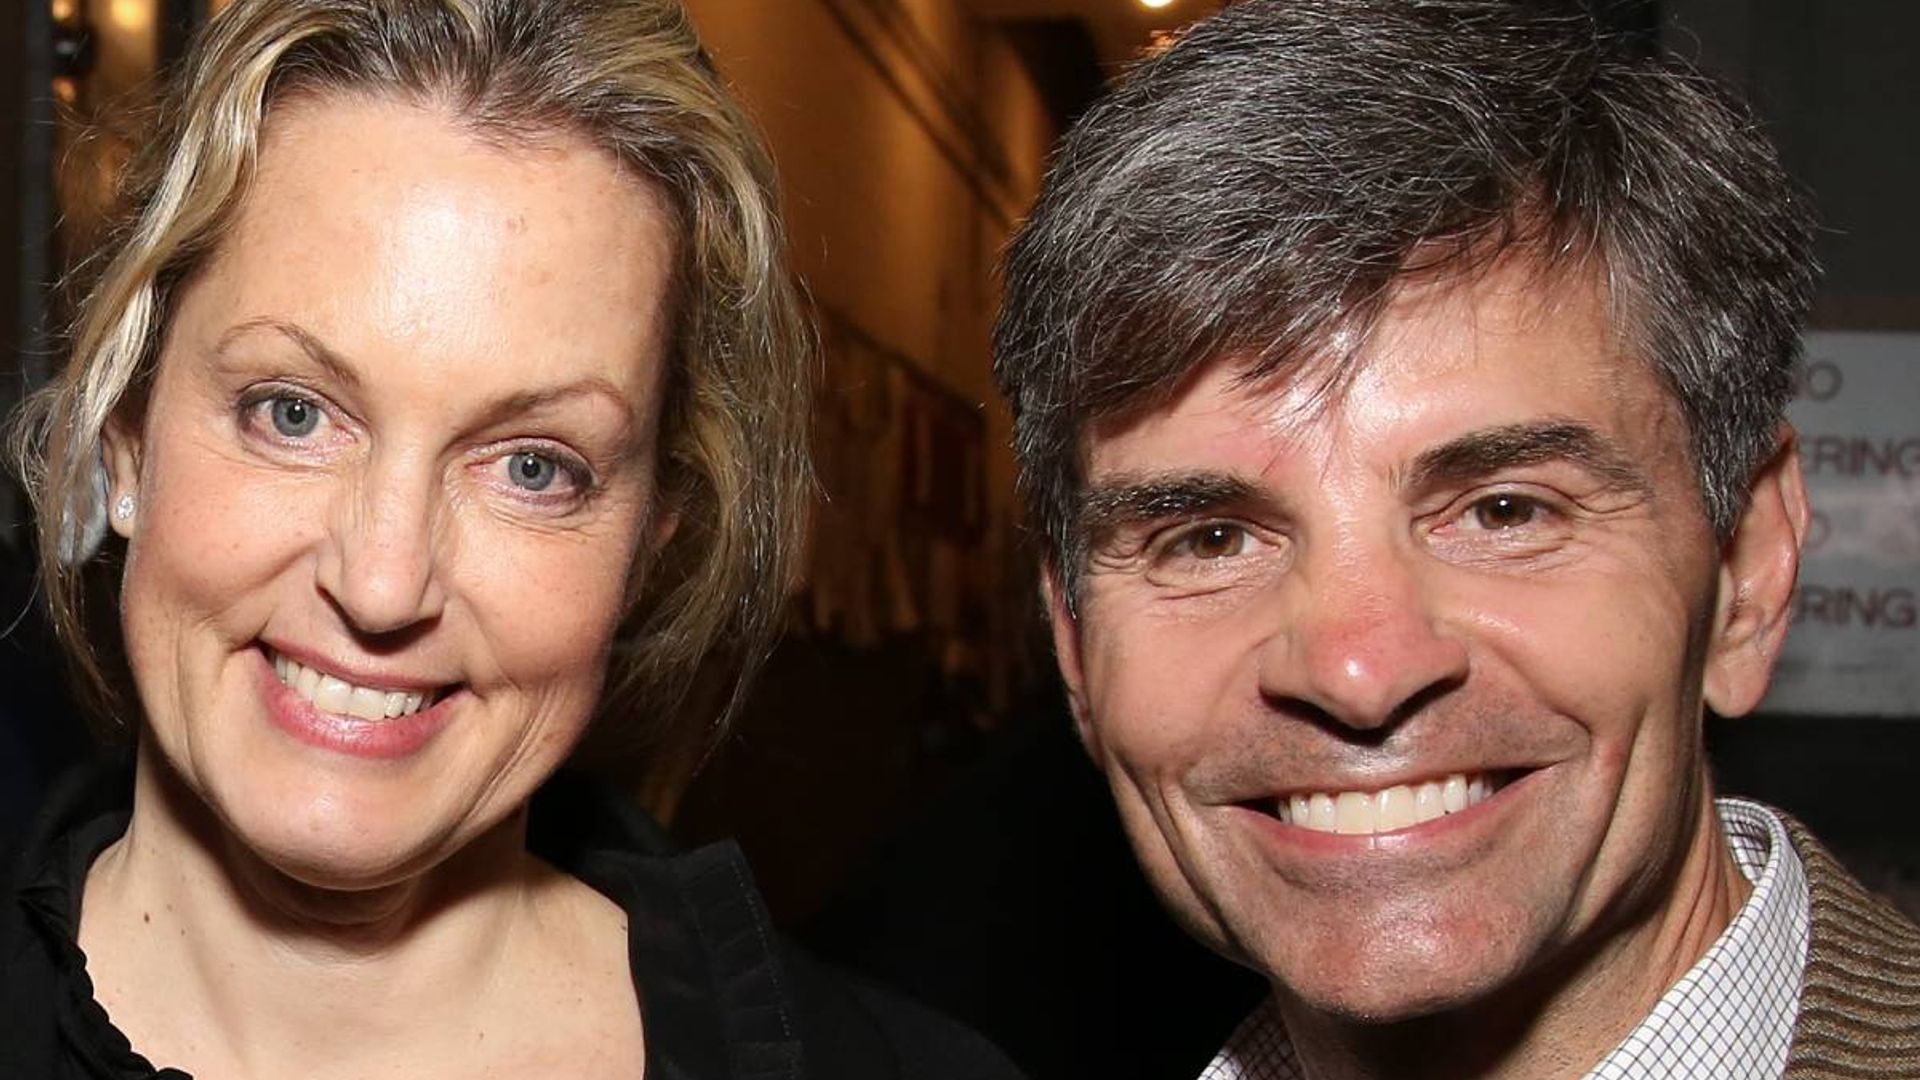 GMA’s George Stephanopoulos & Ali Wentworth’s grand Manhattan living room decor is so unexpected